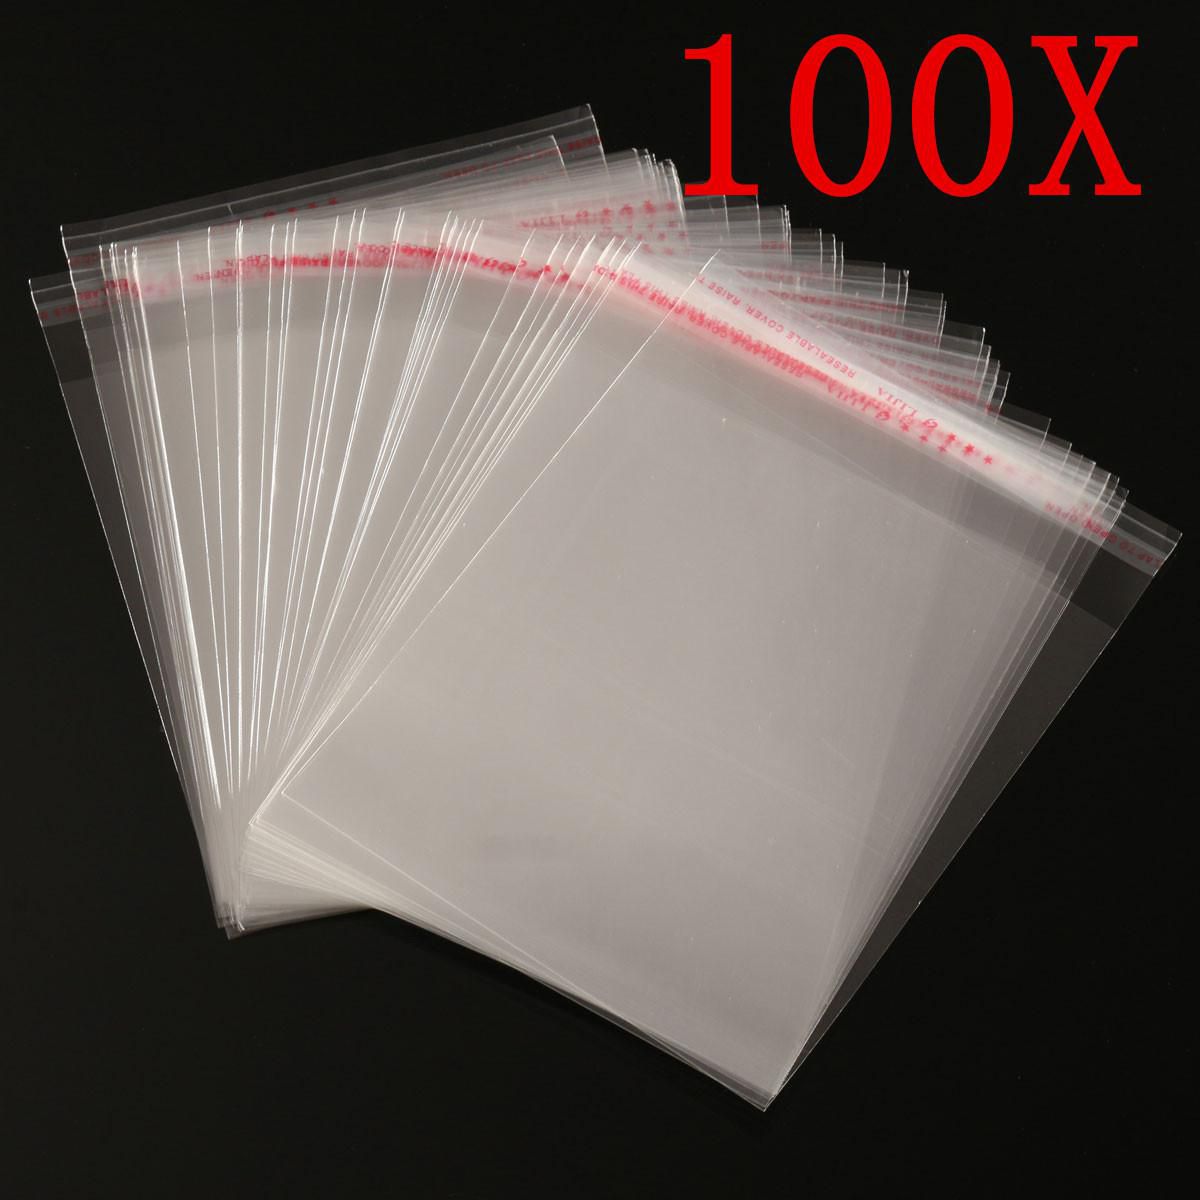 100x Clear Cellophane Cello Display Bags Self Adhesive Seal Plastic OPP For Card